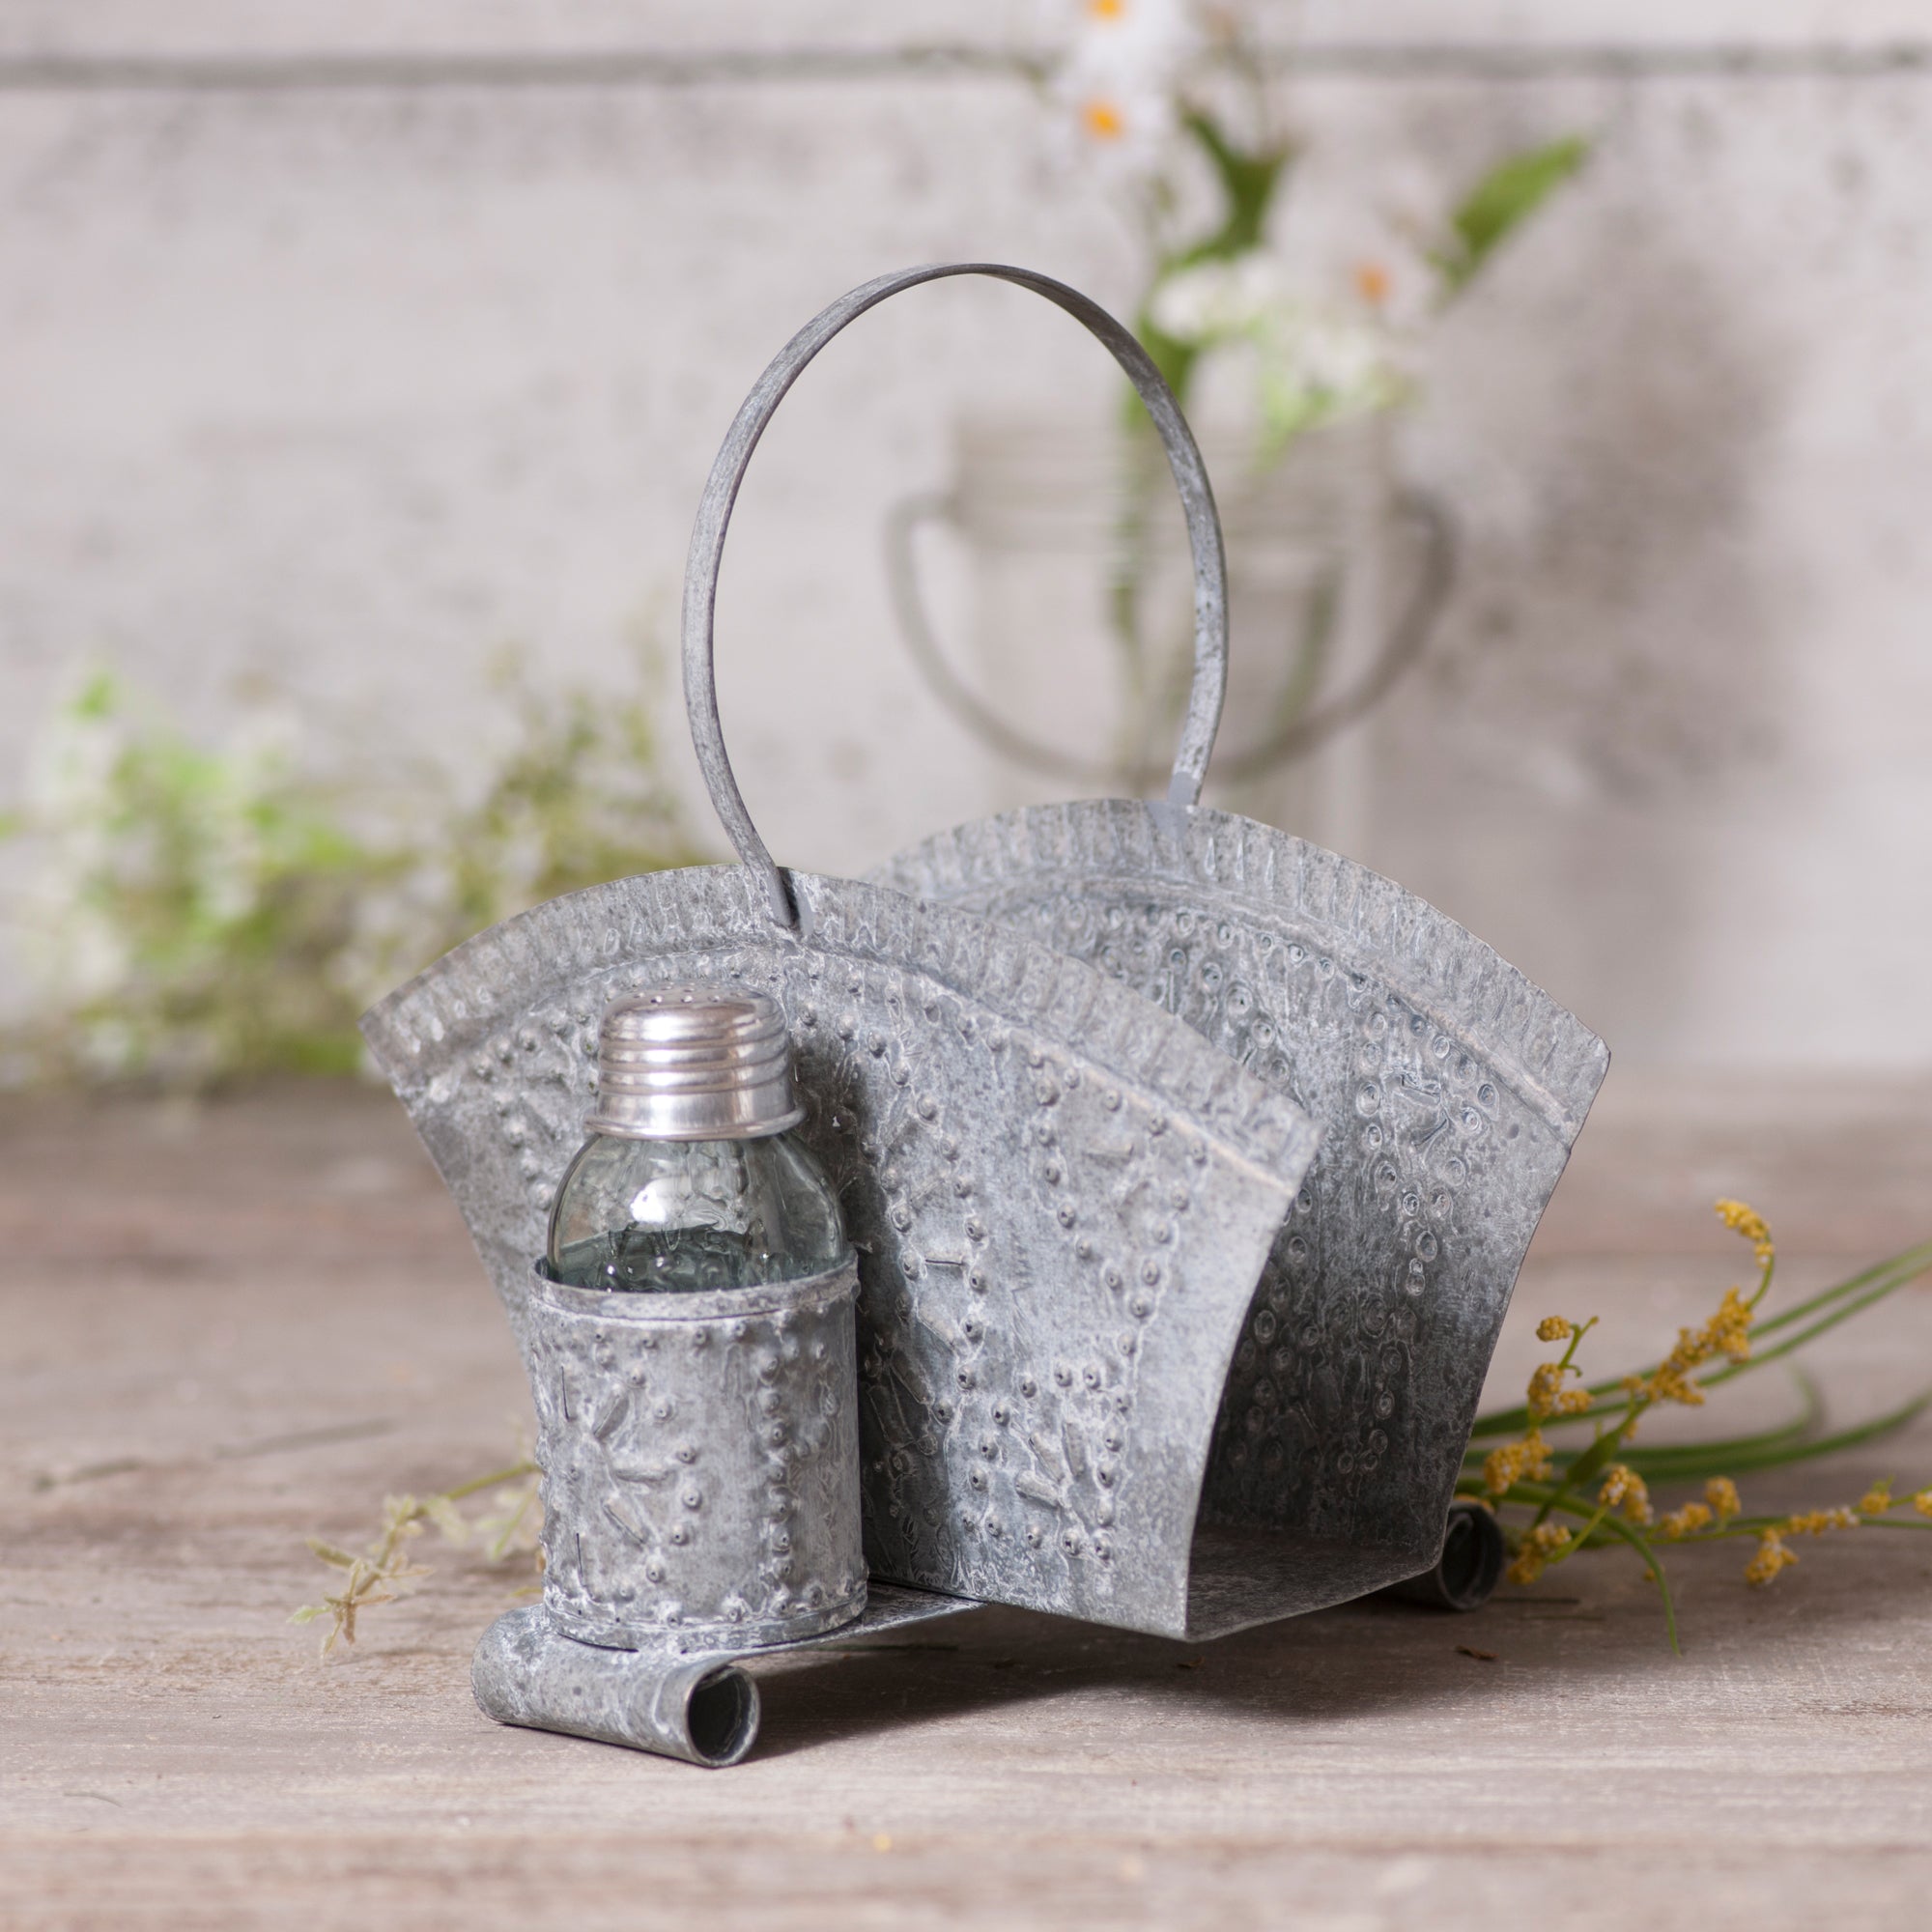 Napkin and Shaker Holder in Weathered Zinc